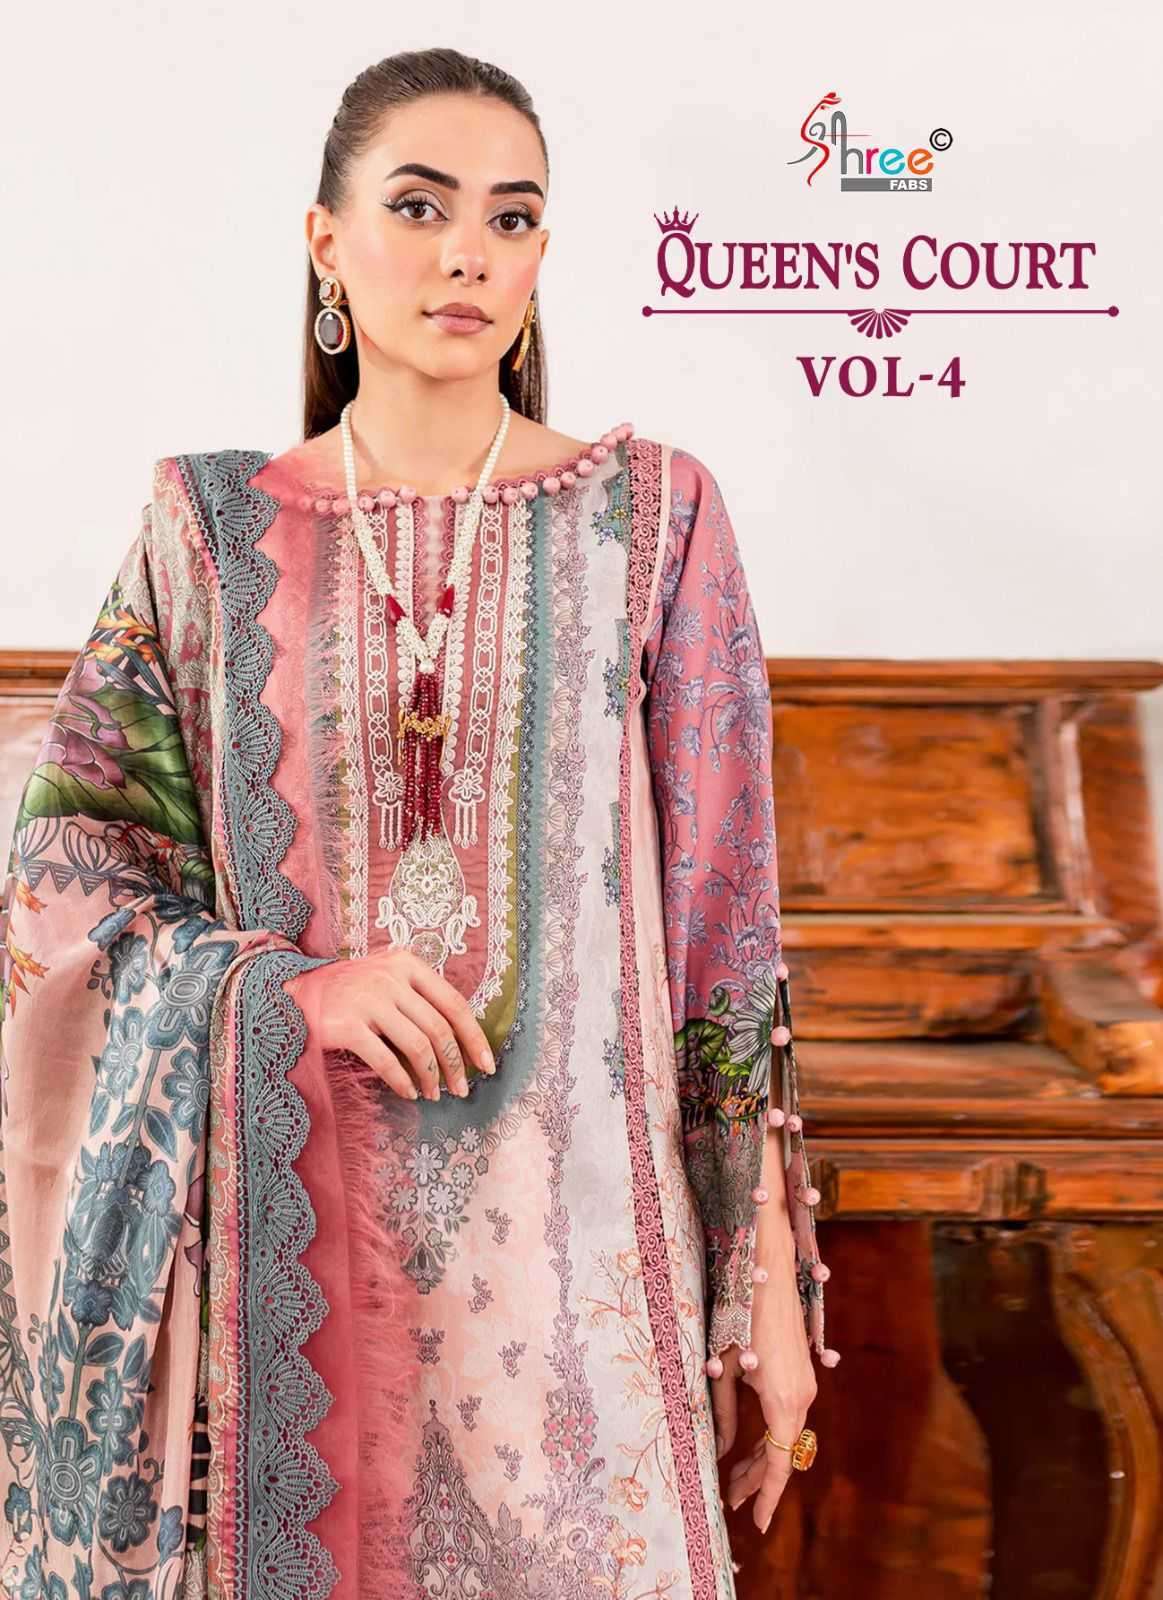 shree fabs queens court vol 4 series 3491-3497 pure cotton suit